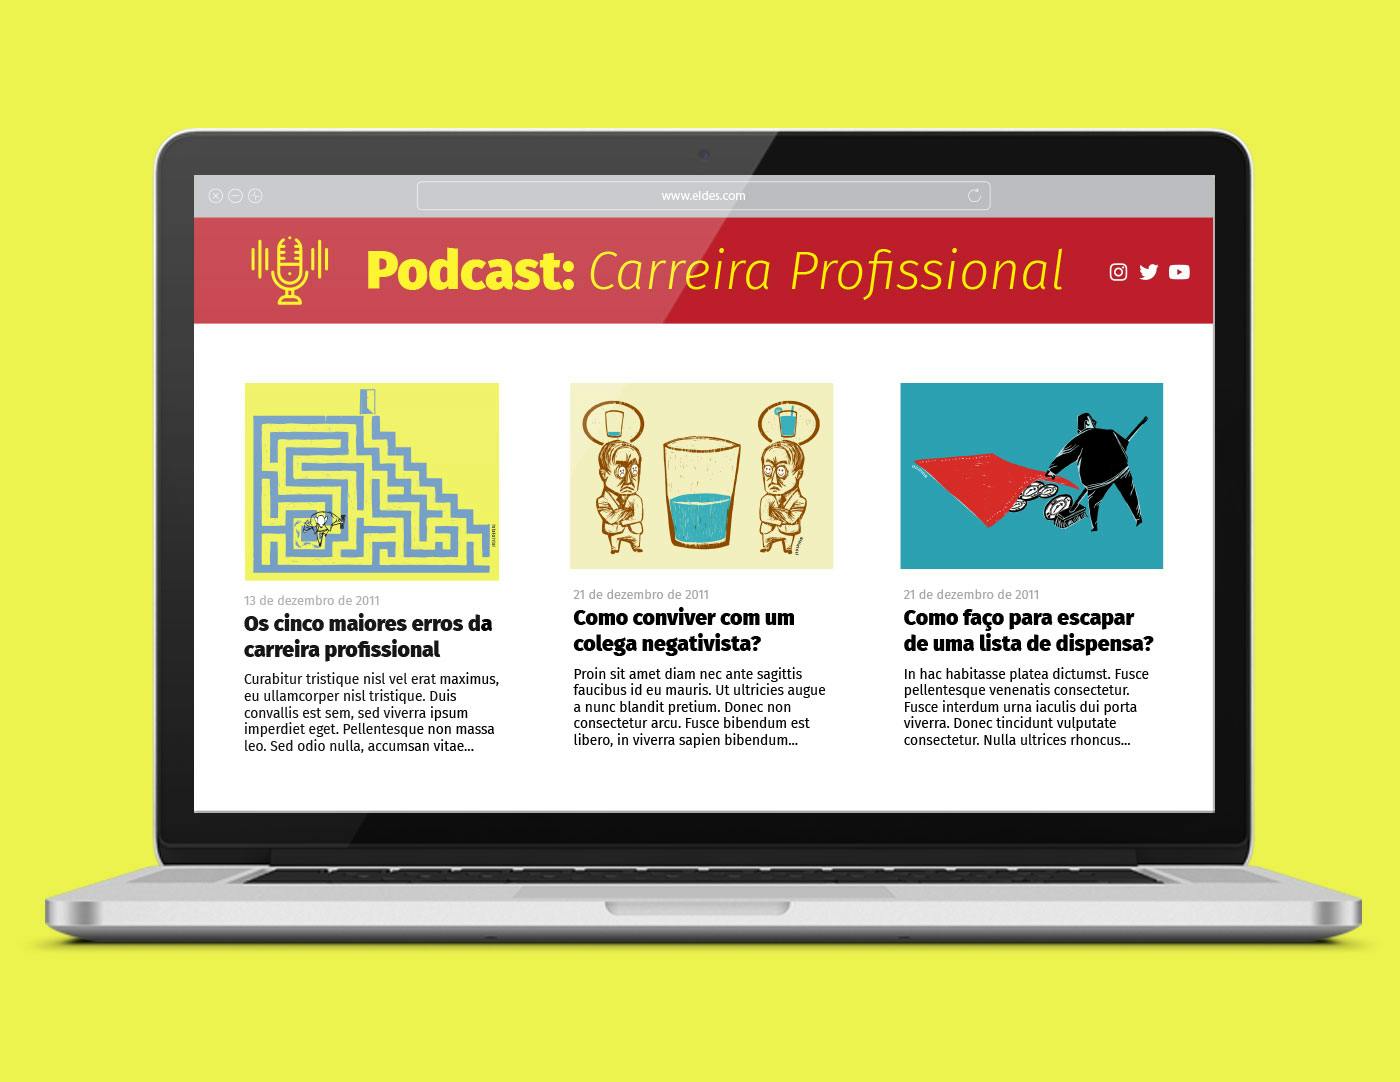 Digital mockup showing some of the illustrations being applied on the podcast website.